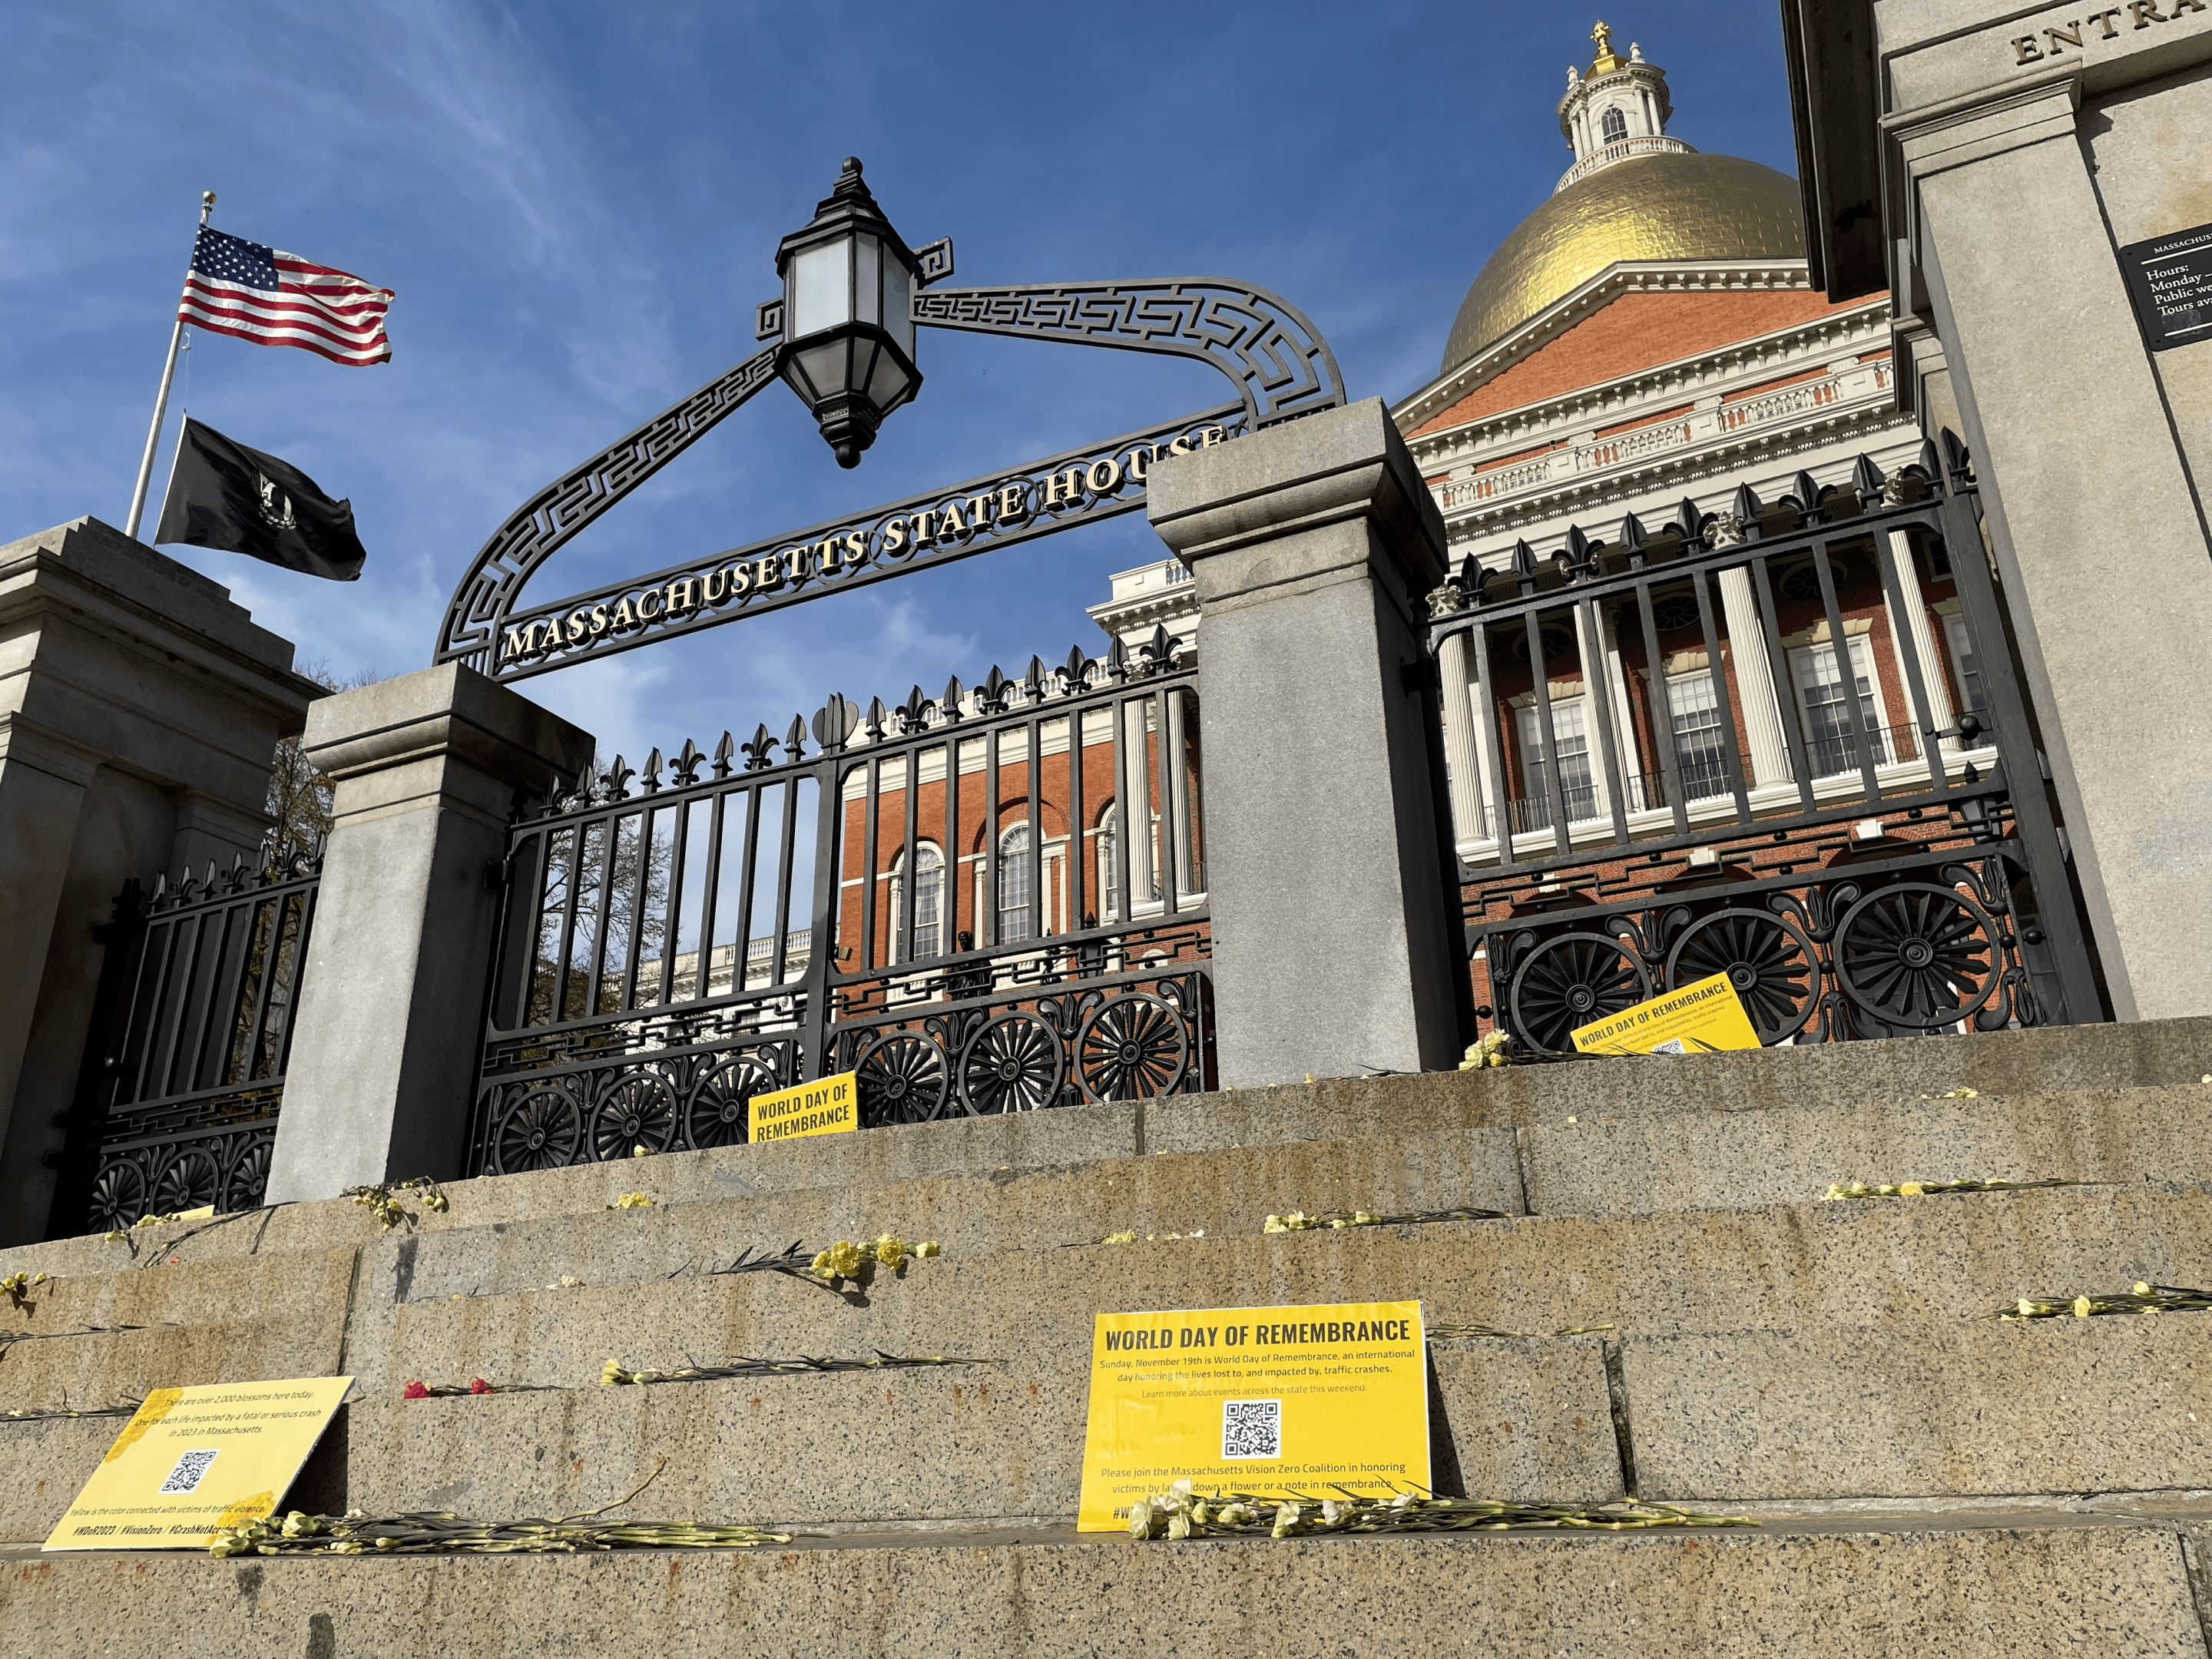 Hundreds of yellow flowers are scattered on the steps of the Massachusetts State House, with the gold-plated dome of the State House visible at upper right. Signs proclaim the flowers are in honor of the victims of traffic violence for the World Day of Remembrance.